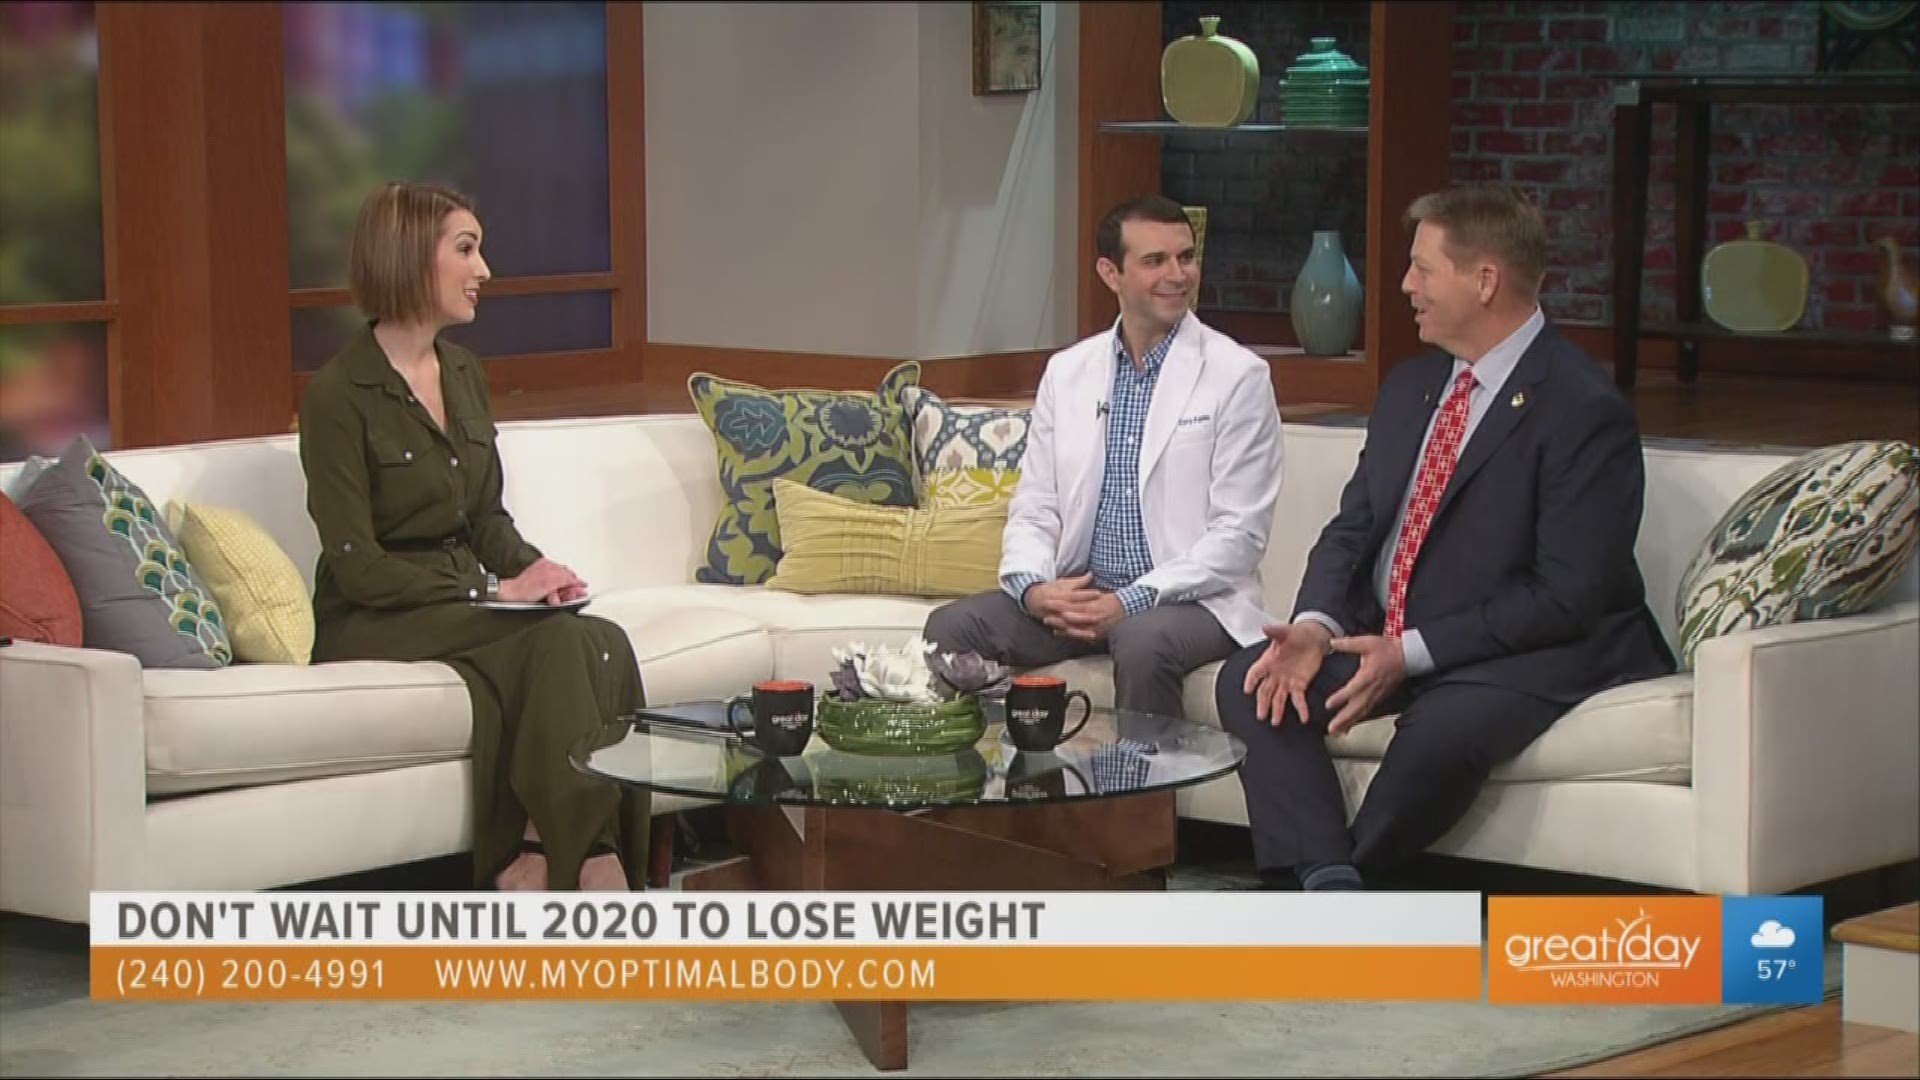 Dr. Aplin discusses how his patient, Richard Root lost over 80 pounds in 4 months. This segment was sponsored by Optimal Body.